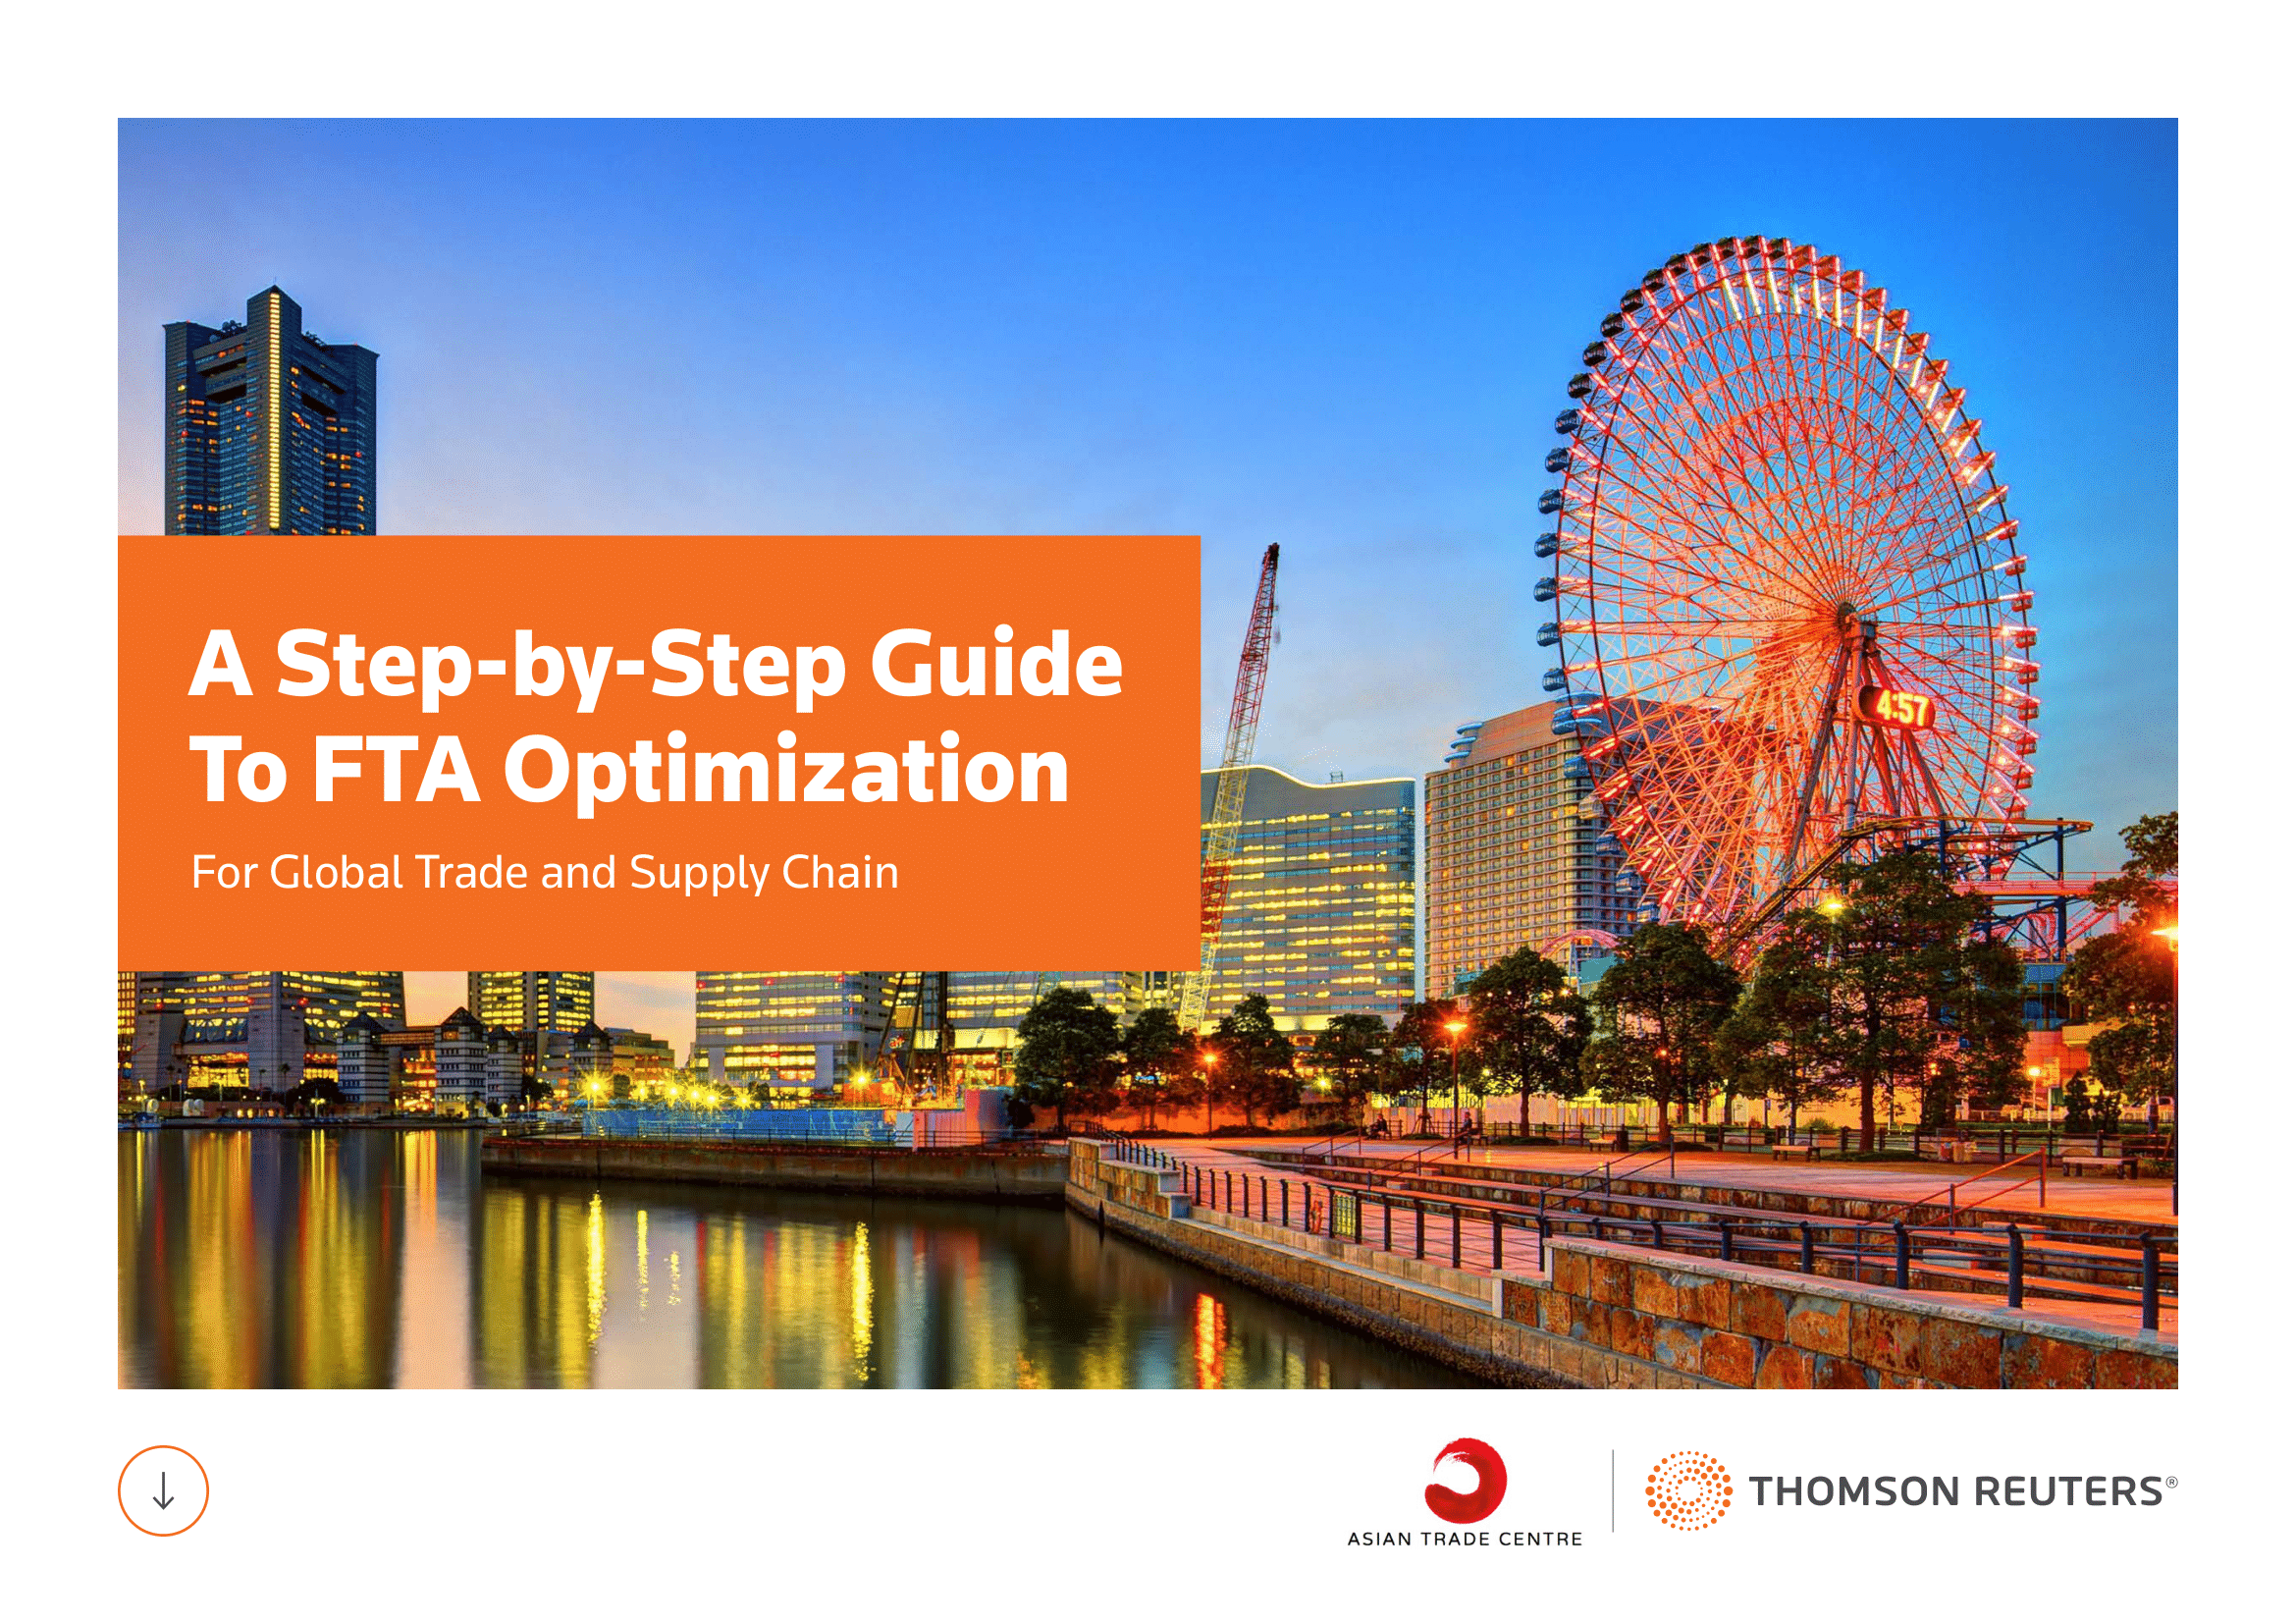 Step by Step Guide_Thomson Reuters and Asian Trade Centre_Final-01.png